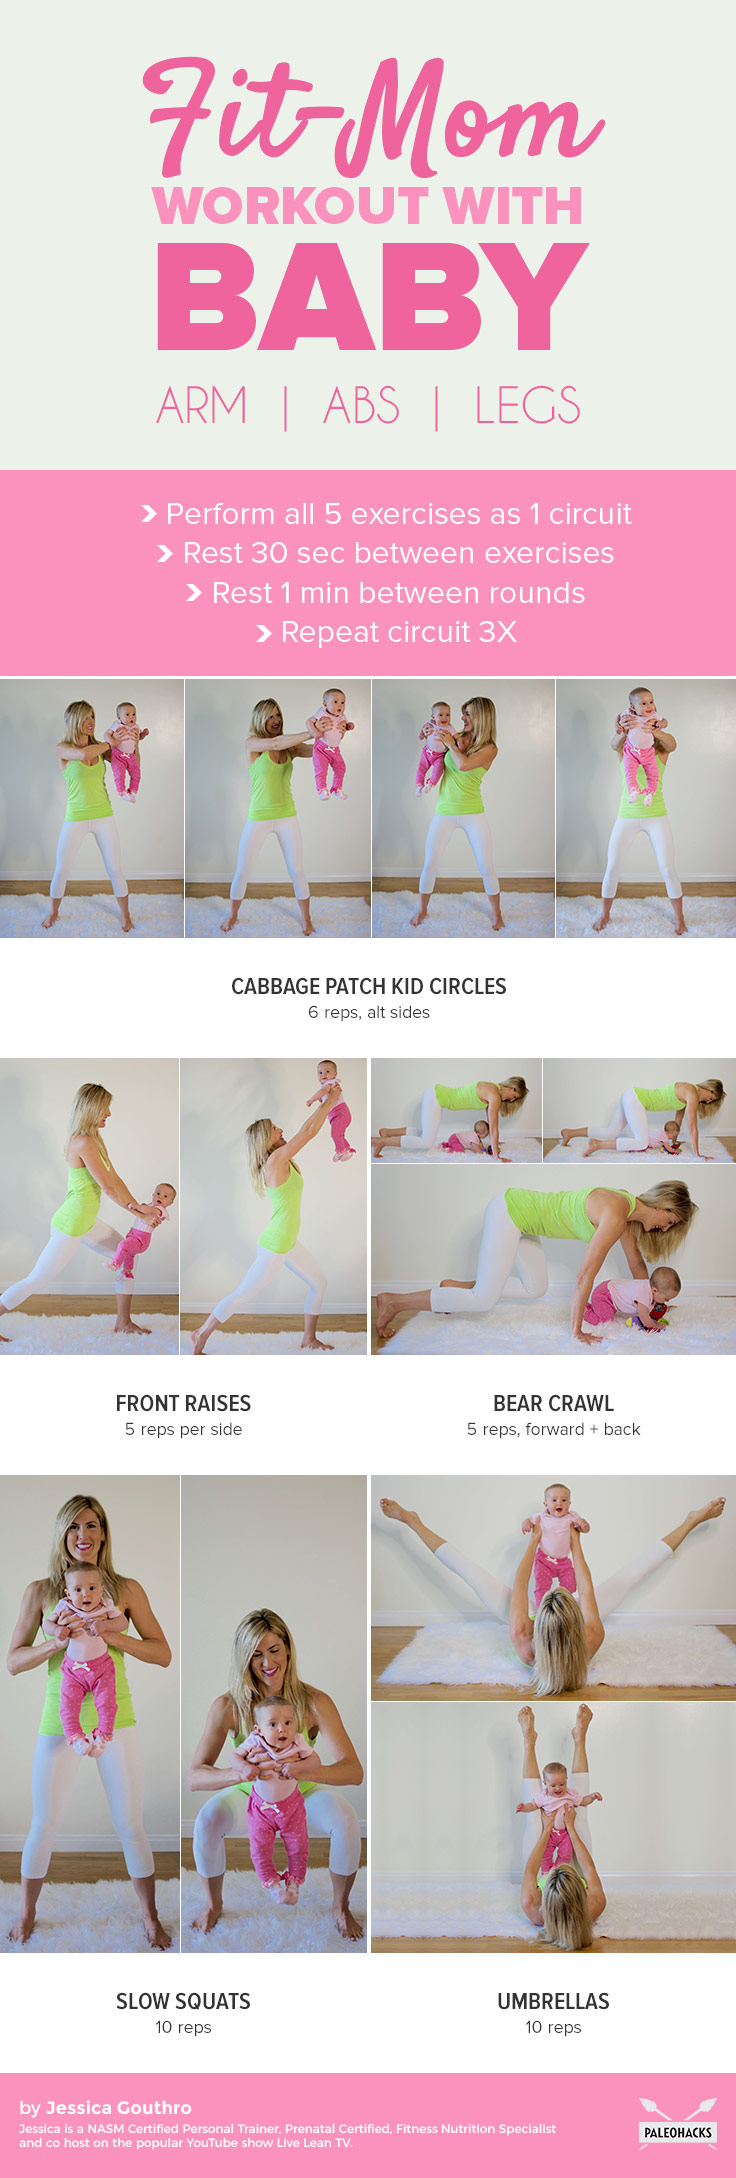 How to workout with your baby